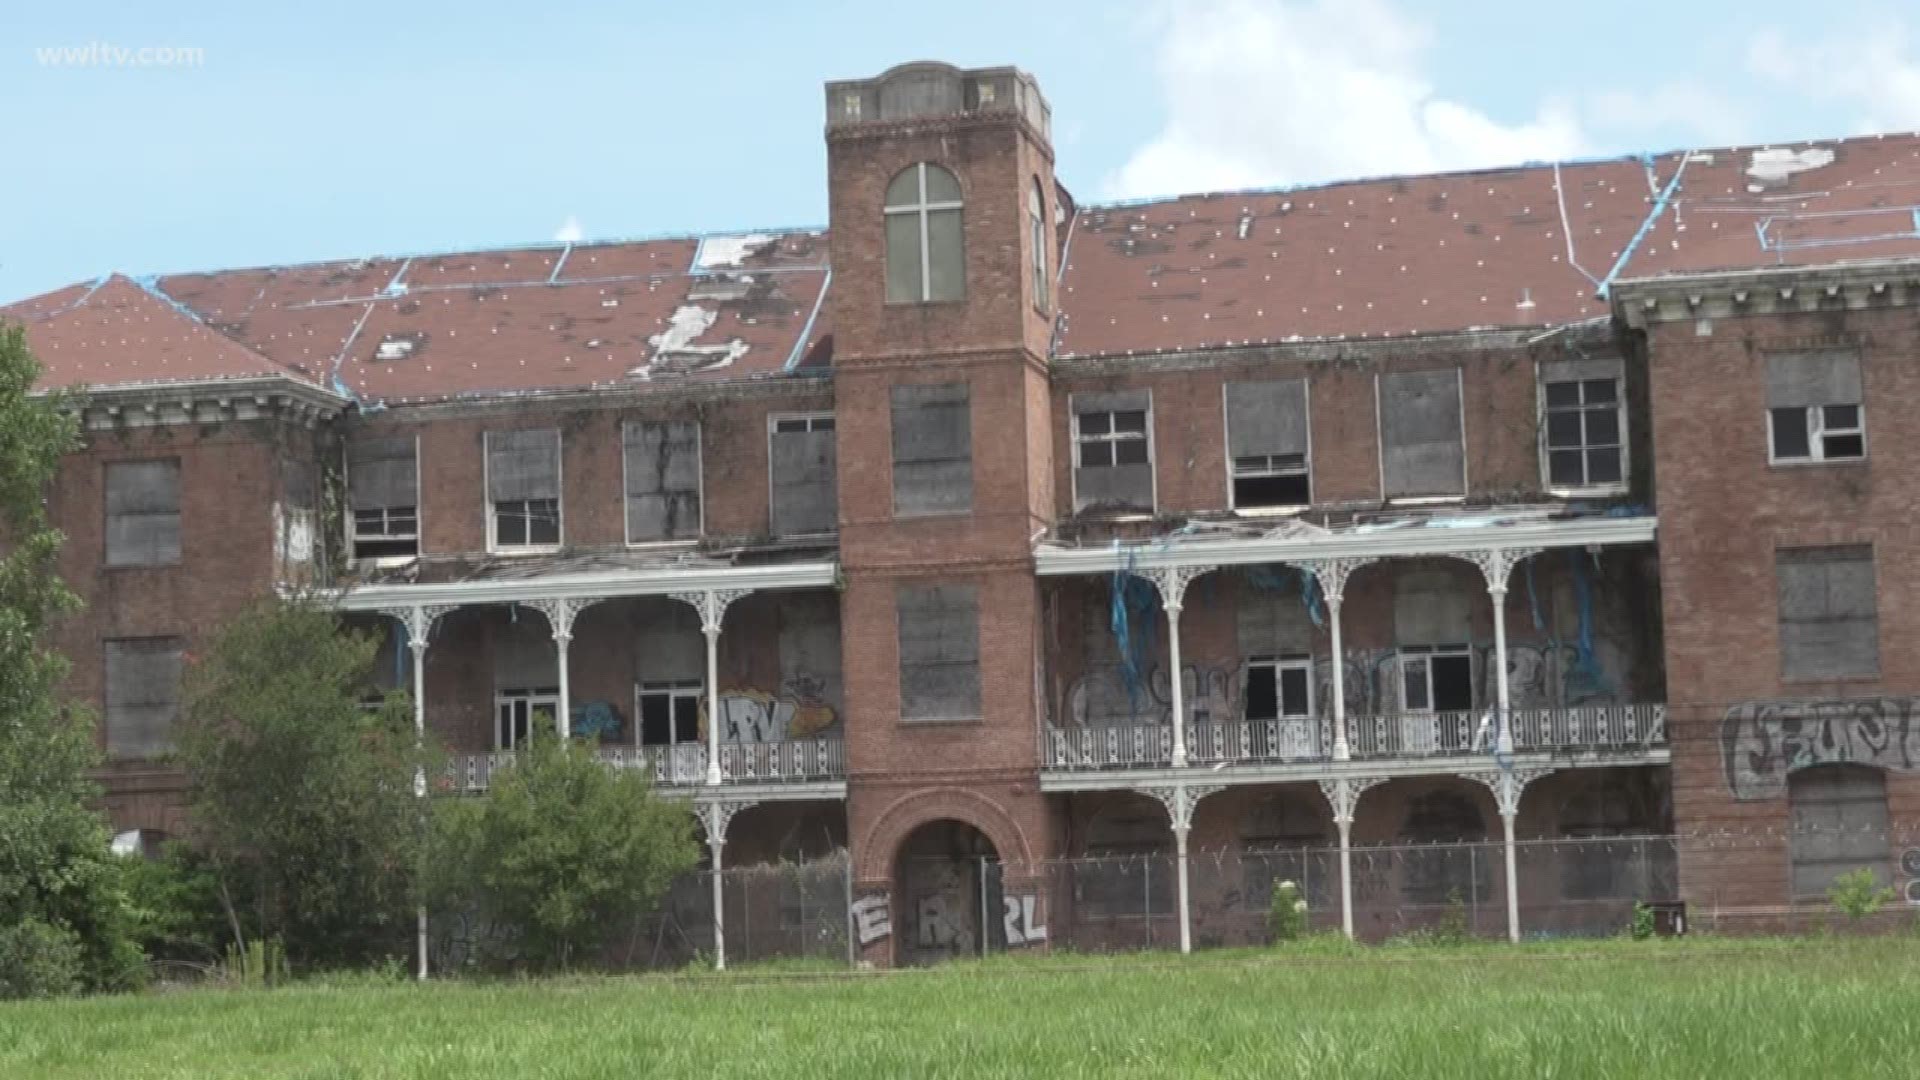 The old site of the Holy Cross School that's been abandoned since Katrina has been listed as one of the nine most endangered historic sites in New Orleans.